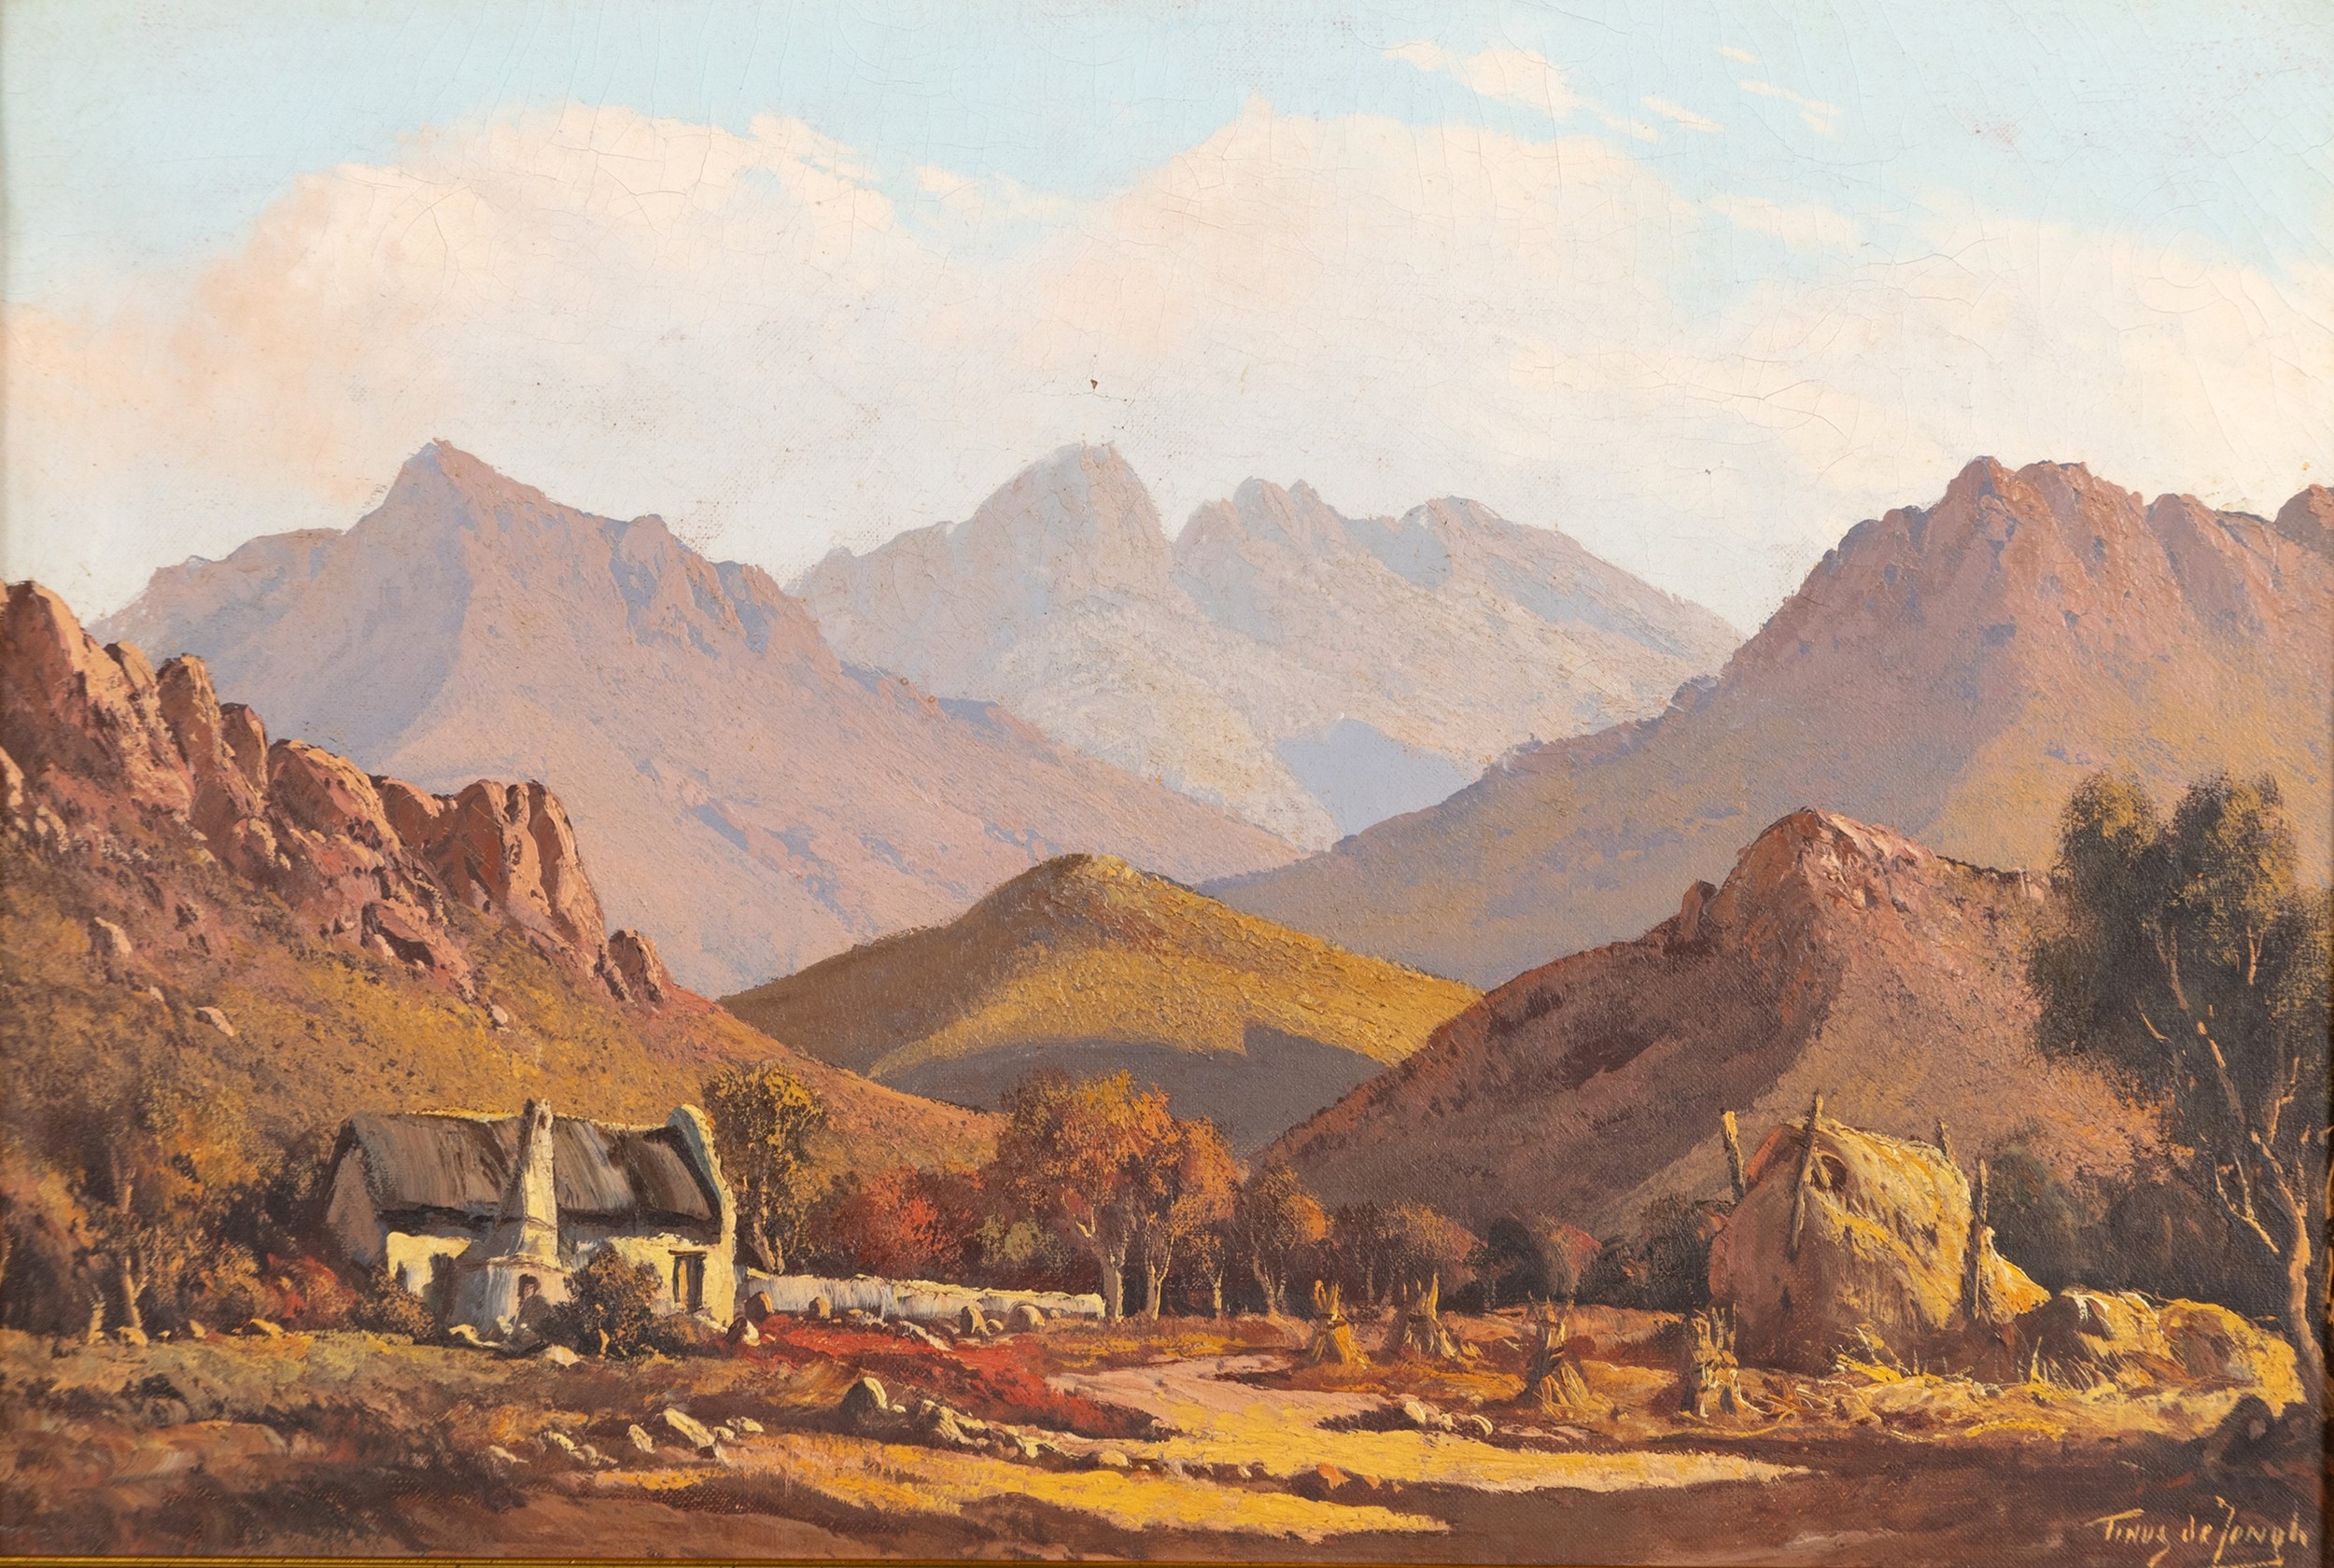 Artwork by Tinus‏ de Jongh, COTTAGE AMONGST MOUNTAINS, Made of oil on canvas